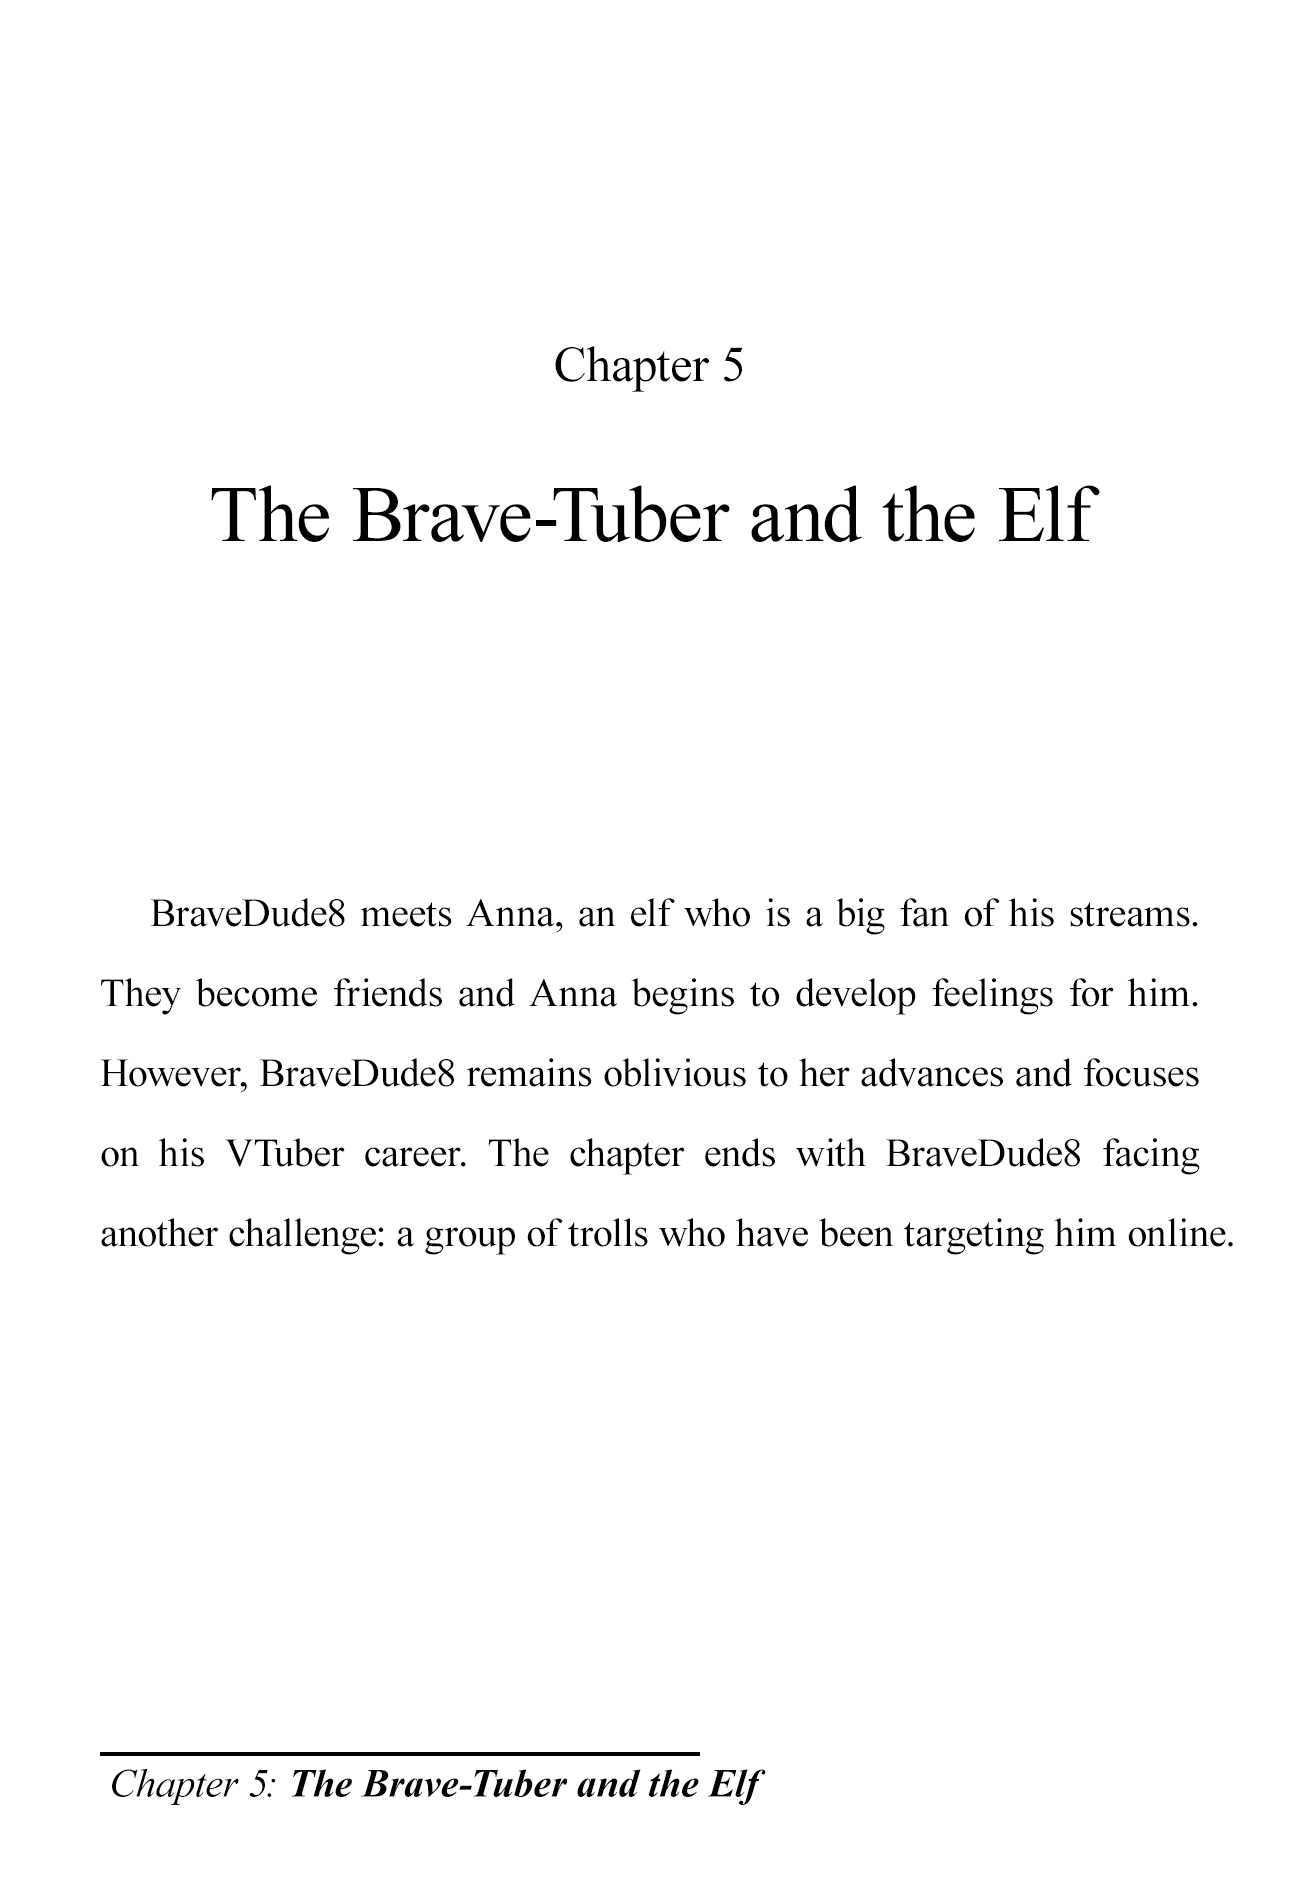 The Brave-Tuber Vol.1 Chapter 5: The Brave-Tuber And The Elf - Picture 1